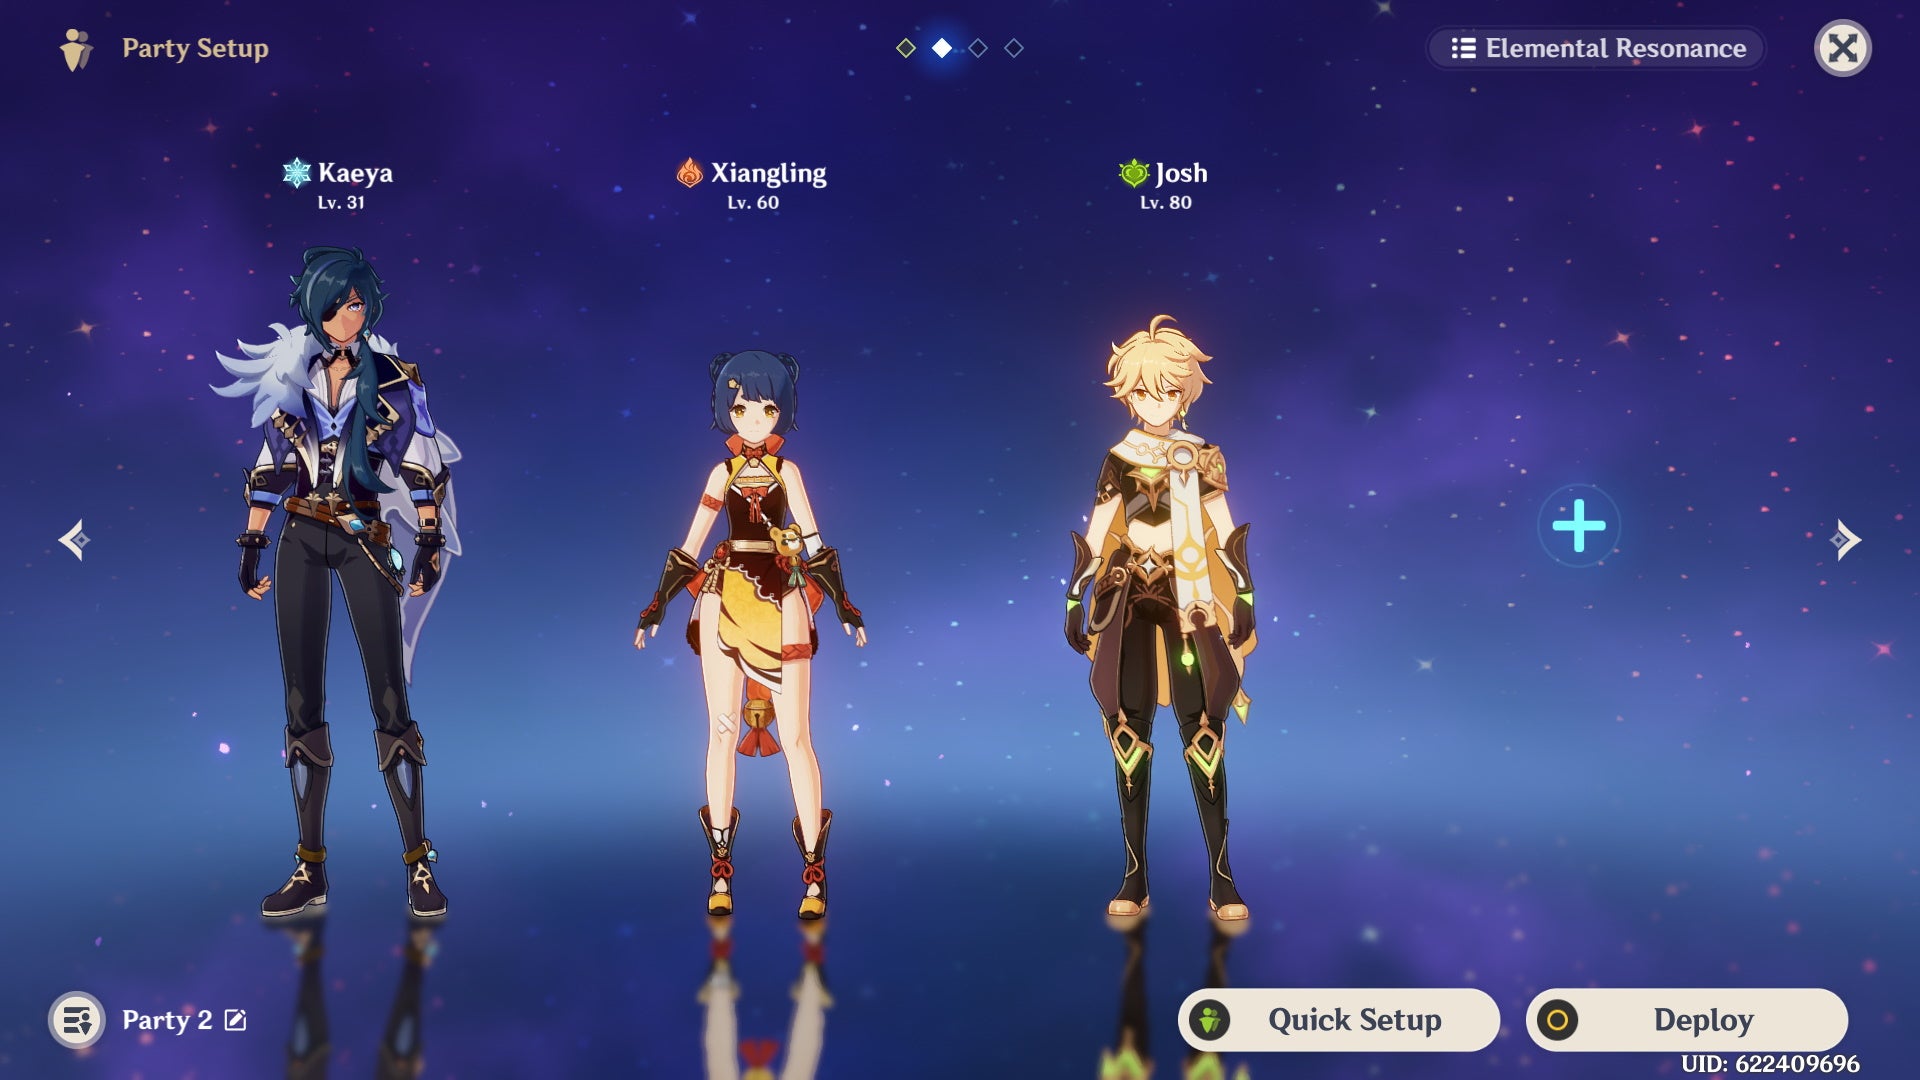 Cyno teams: A menu page showing Cyno's F2P team with Xiangling, the Dendro Traveler, and Kaeya